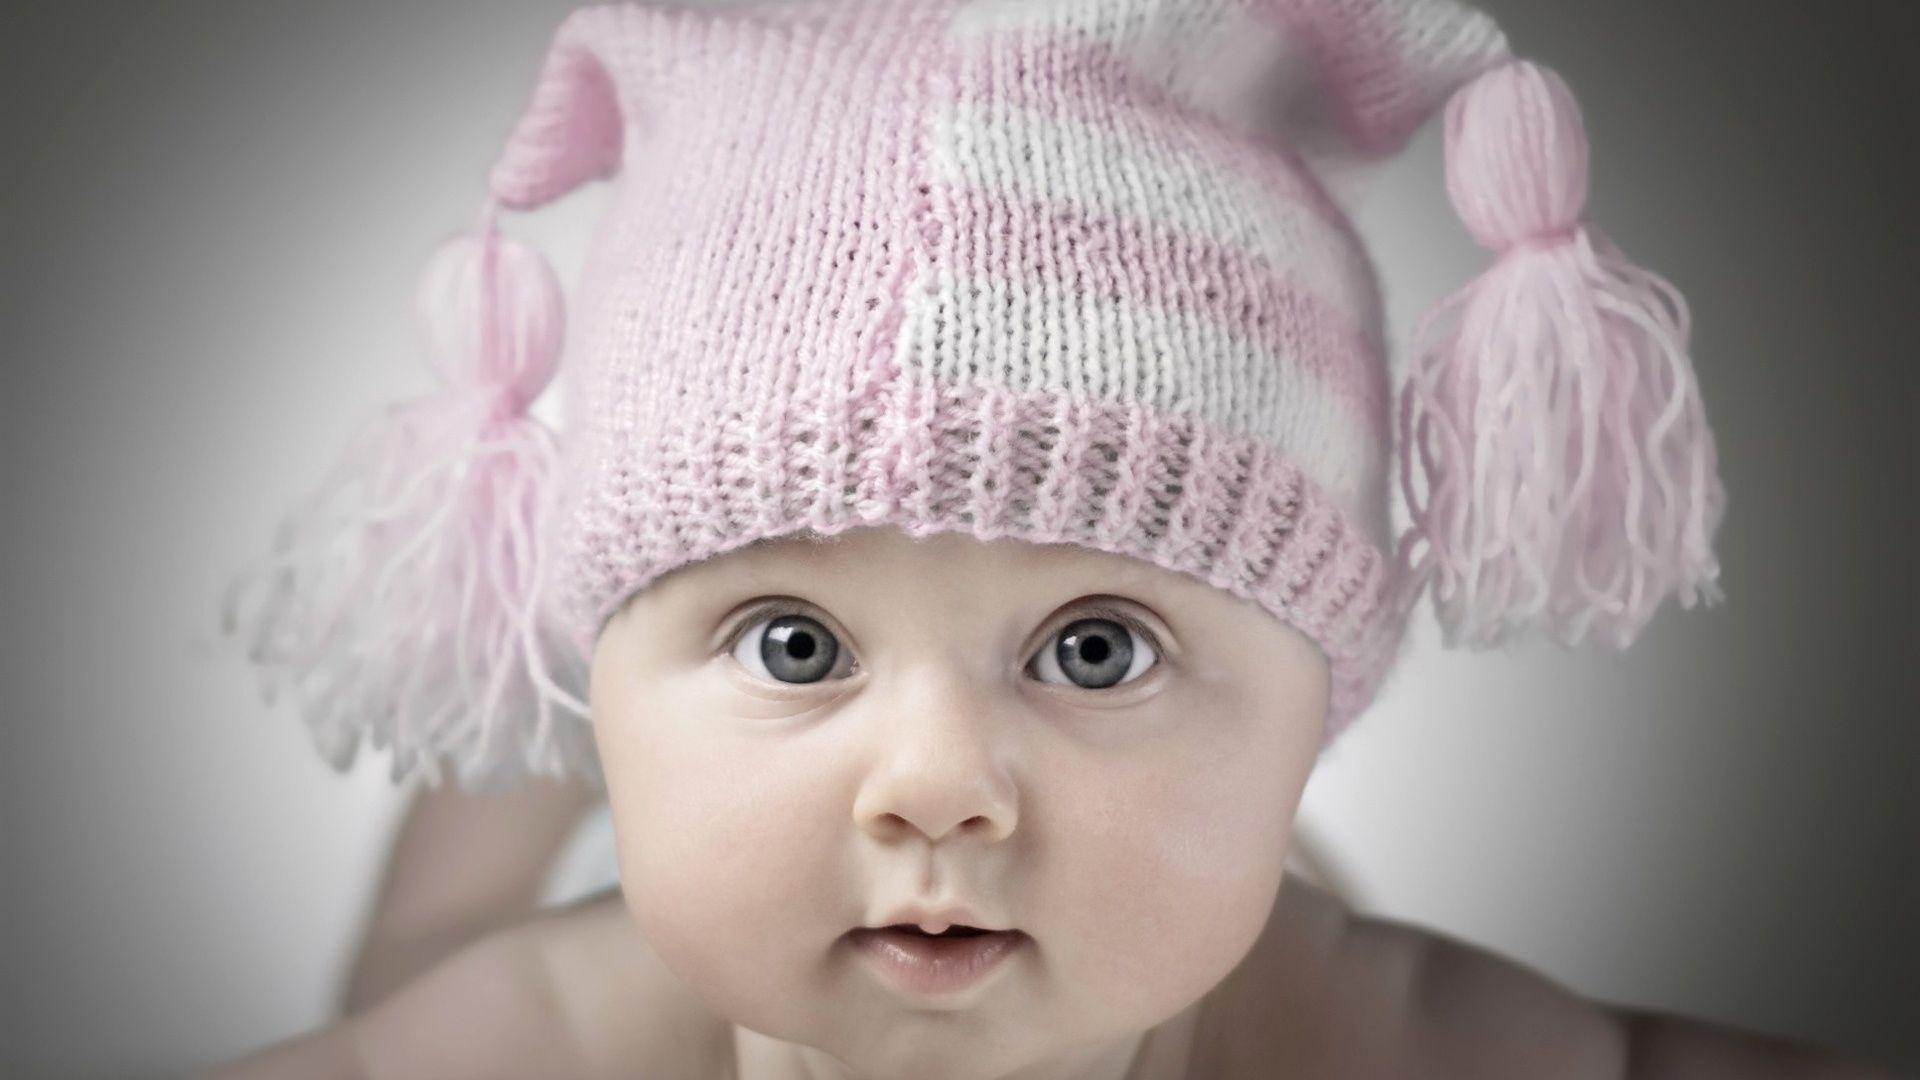 HD wallpaper: Newborn Kid Sweet Face, gray and beige knitted cap, Baby, cute  | Wallpaper Flare